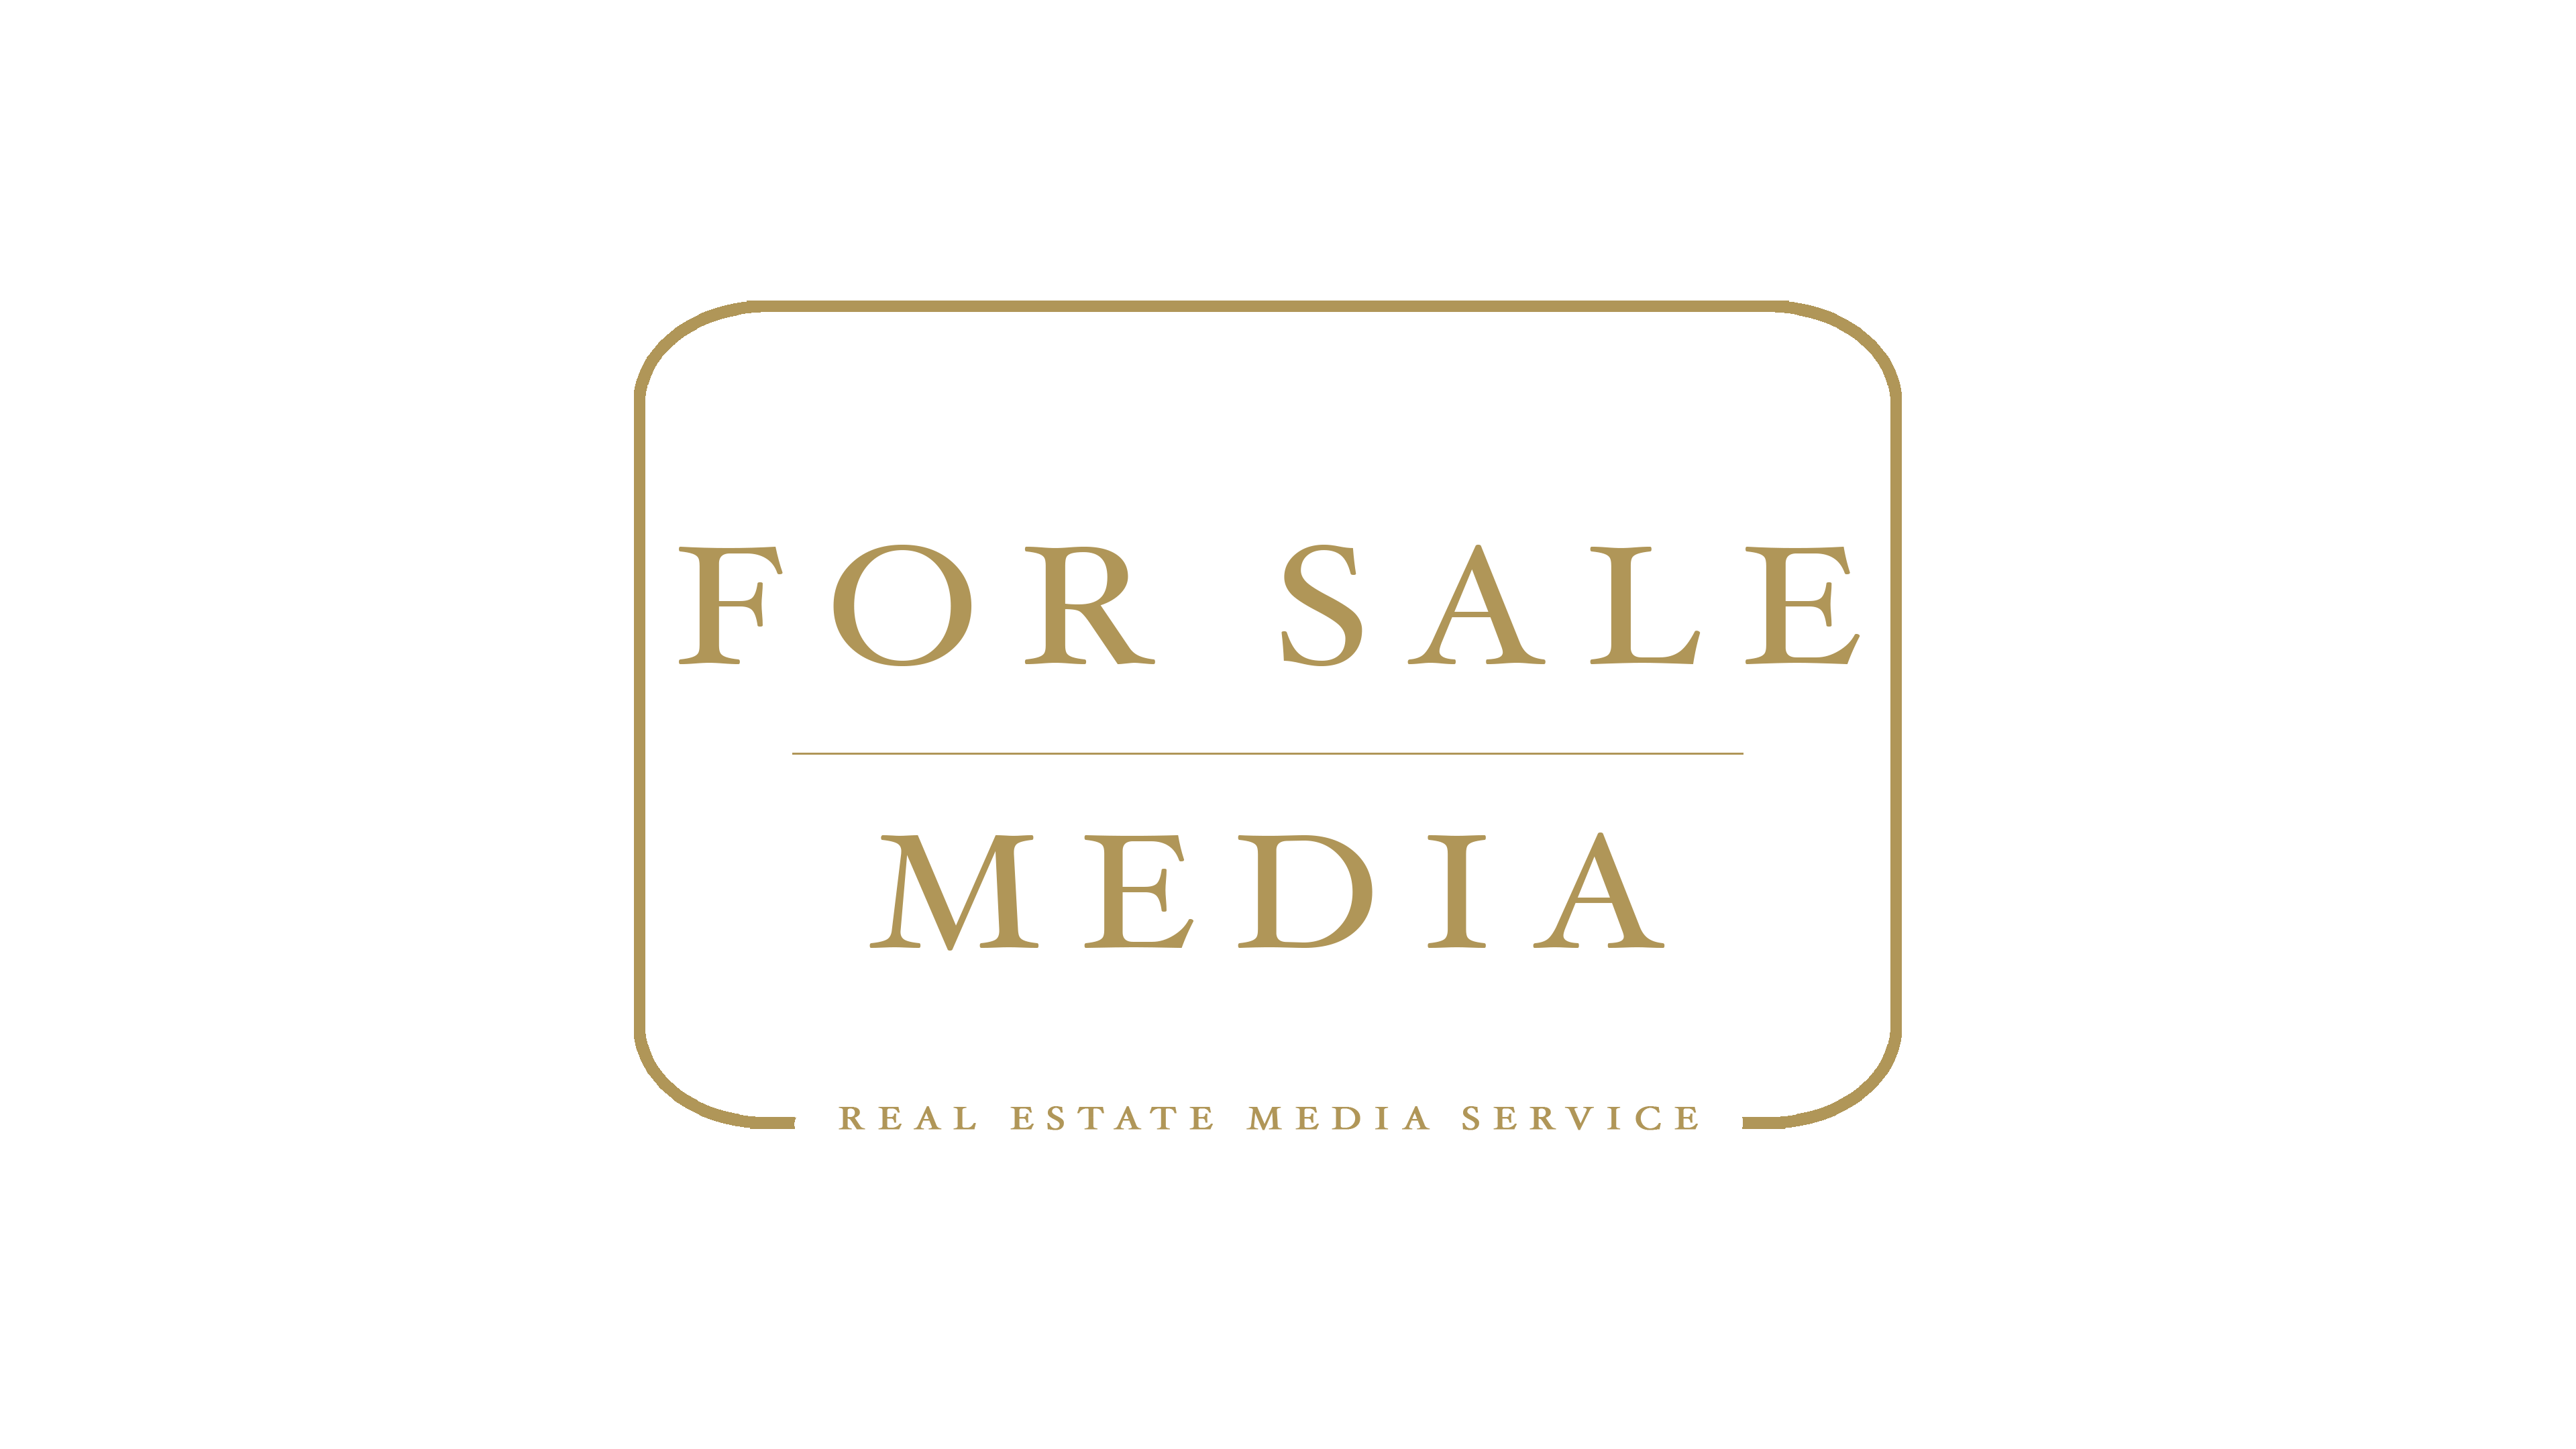 For Sale Media 2021 3840 x 2160 Gold